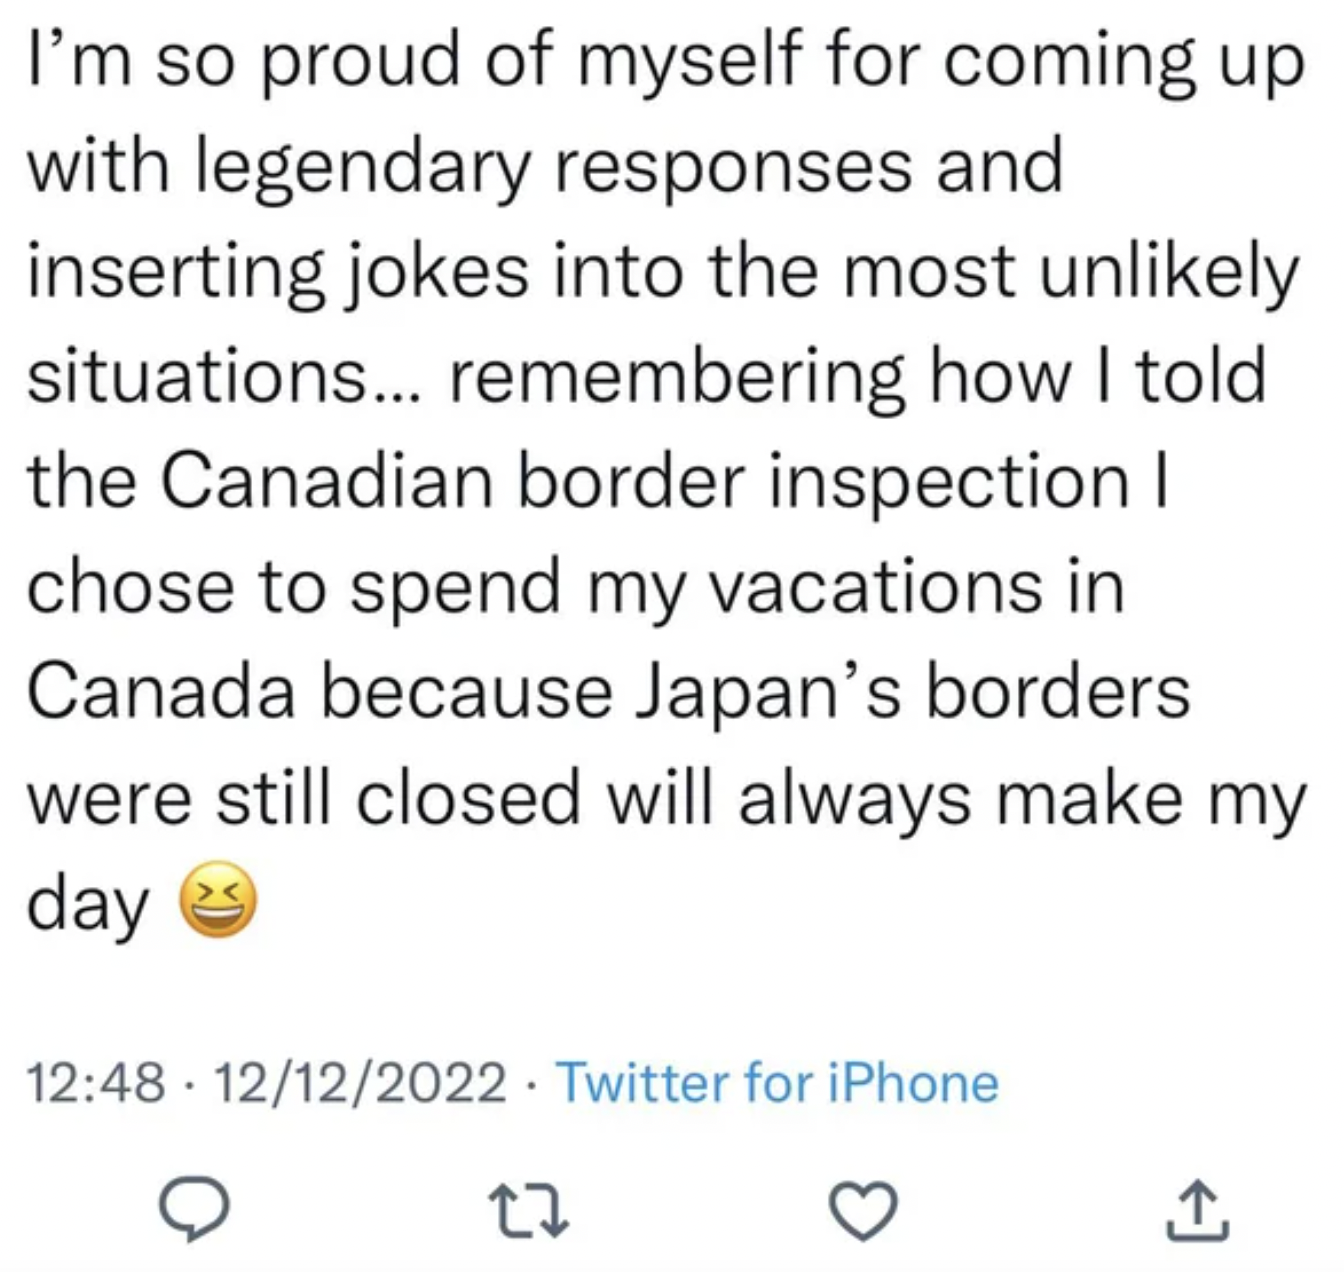 Cringey Pics - document - I'm so proud of myself for coming up with legendary responses and inserting jokes into the most unly situations... remembering how I told the Canadian border inspection I chose to spend my vacations in Canada because Japan's bord